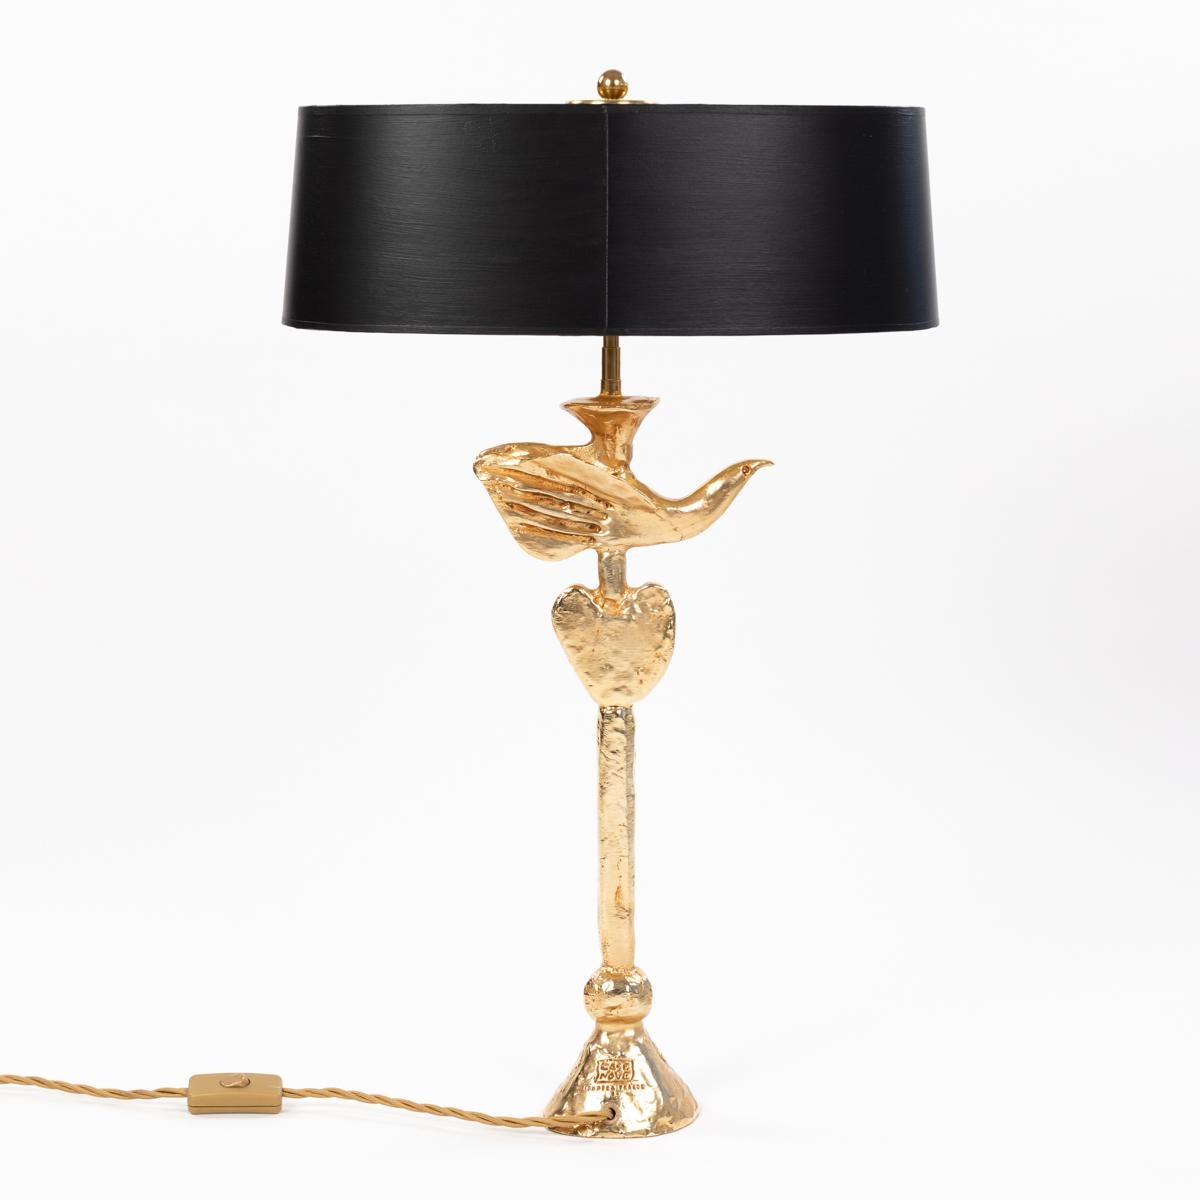 French Gilded Bronze Table Lamp by Pierre Casenove for Fondica, 1980s For Sale 1